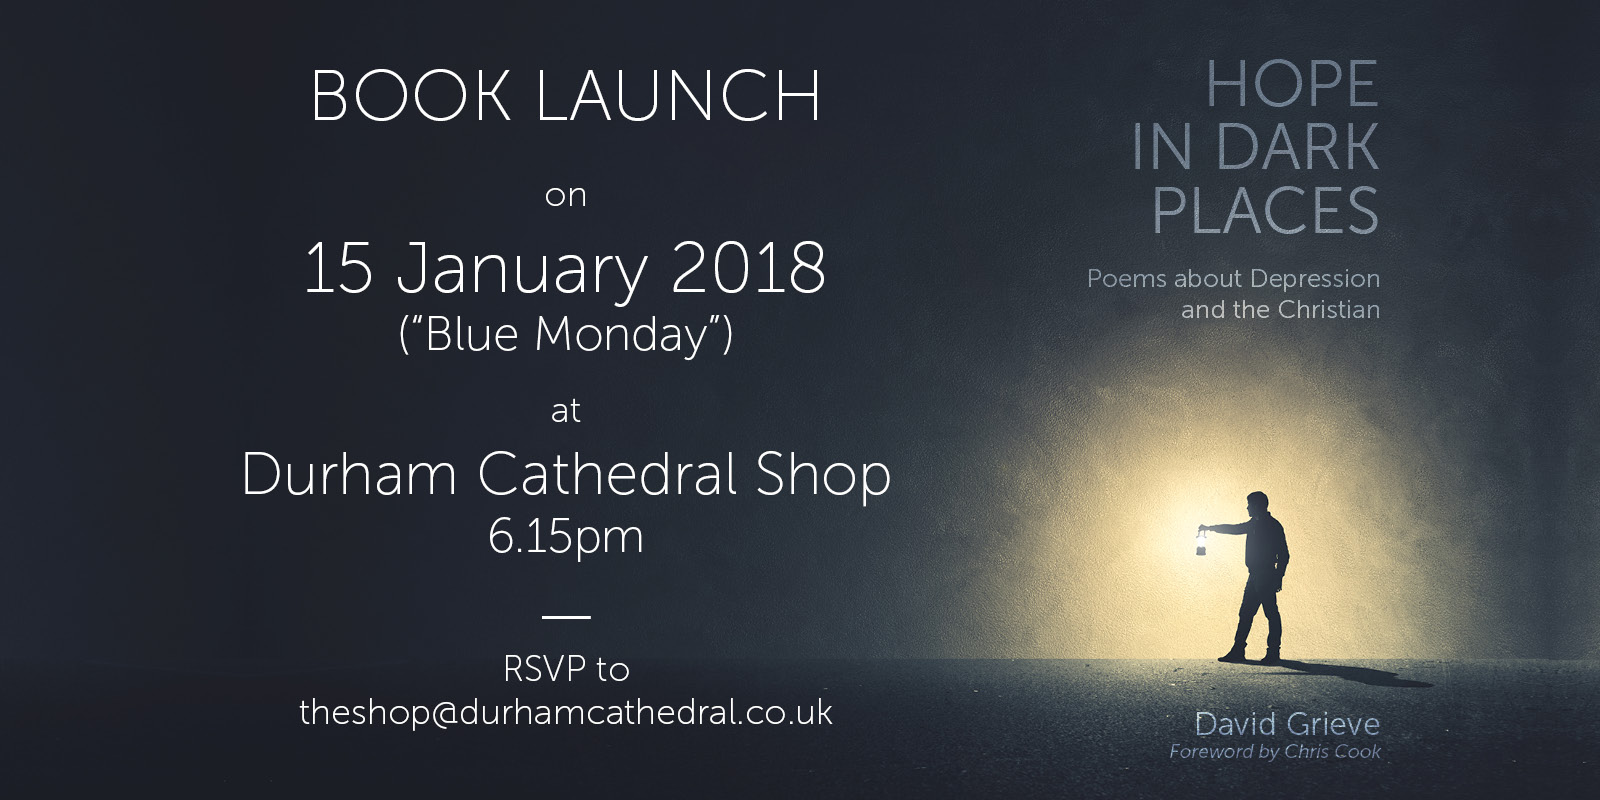 Book Launch - 6.15pm on 15 January 2018 at Durham Cathedral Shop